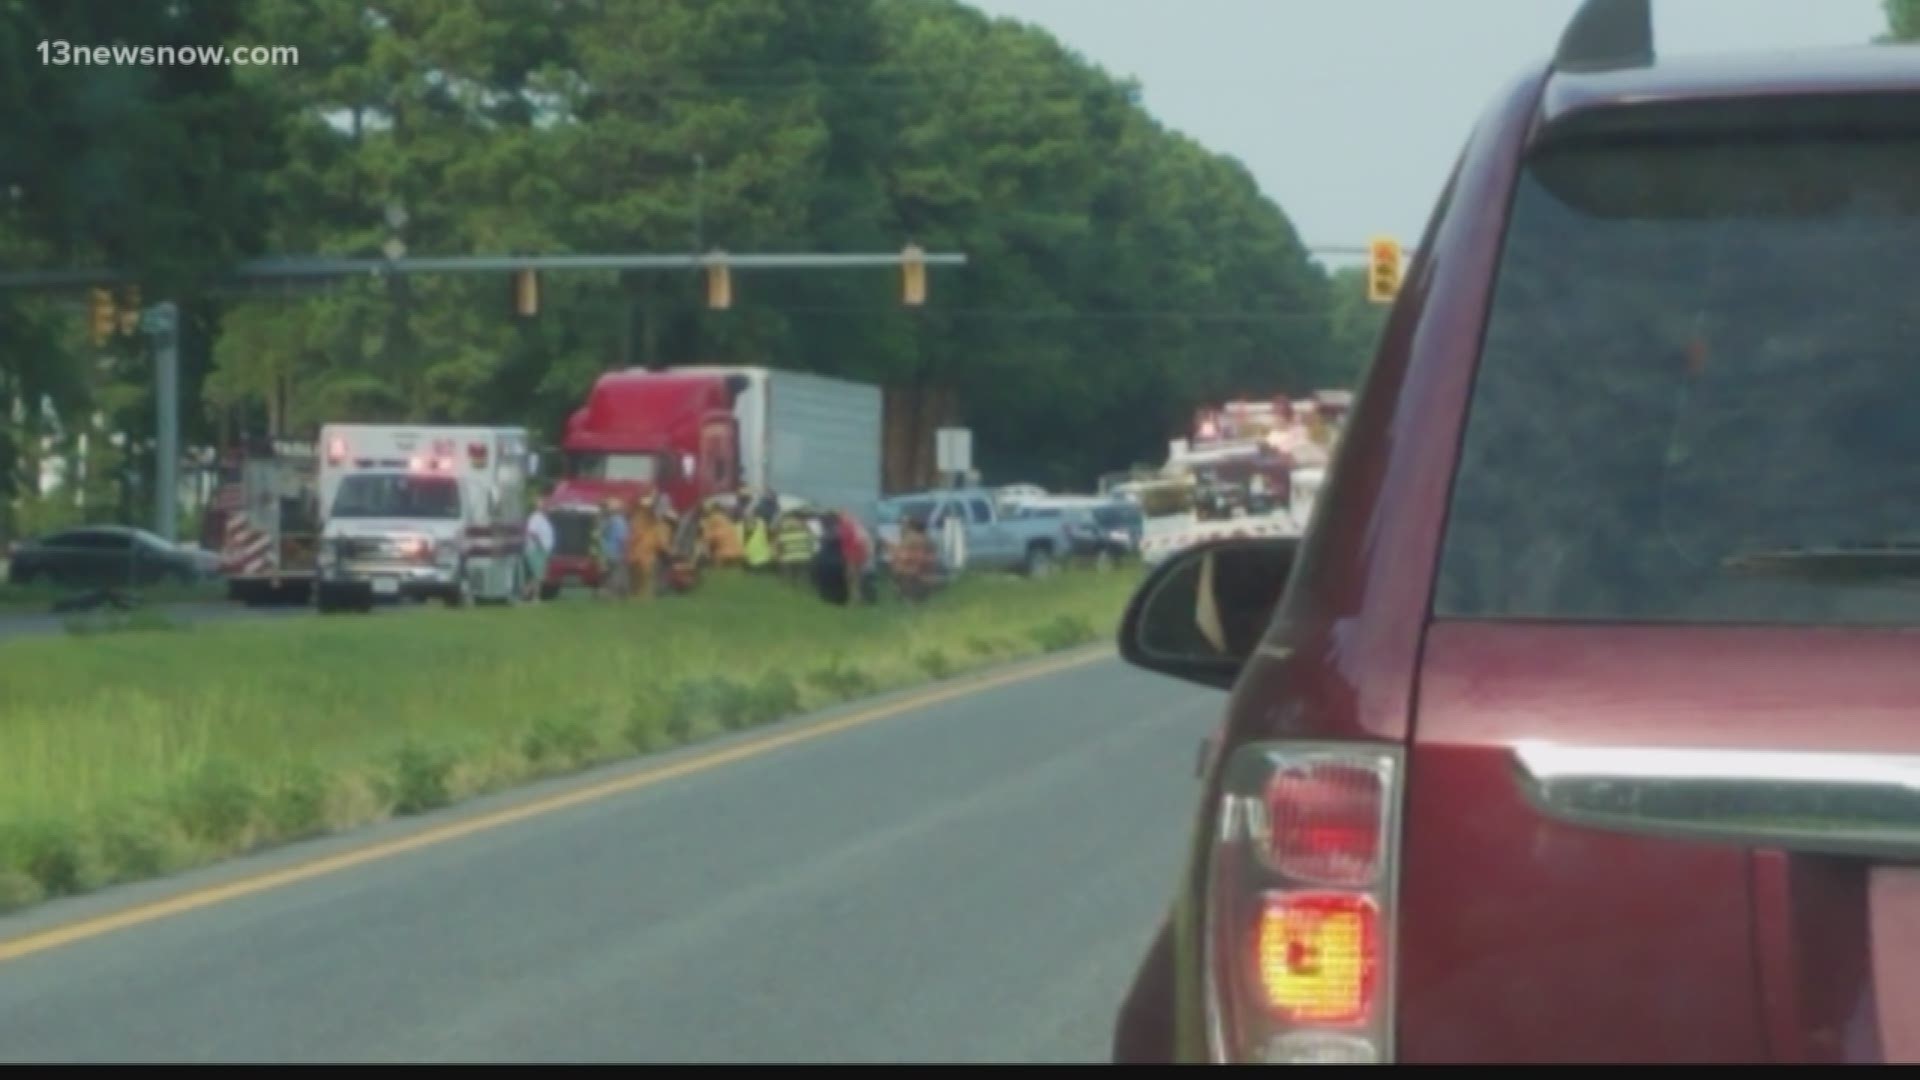 Around 5:20 p.m. a car ran a red light in Accomack County, causing a truck to hit the car killing two.